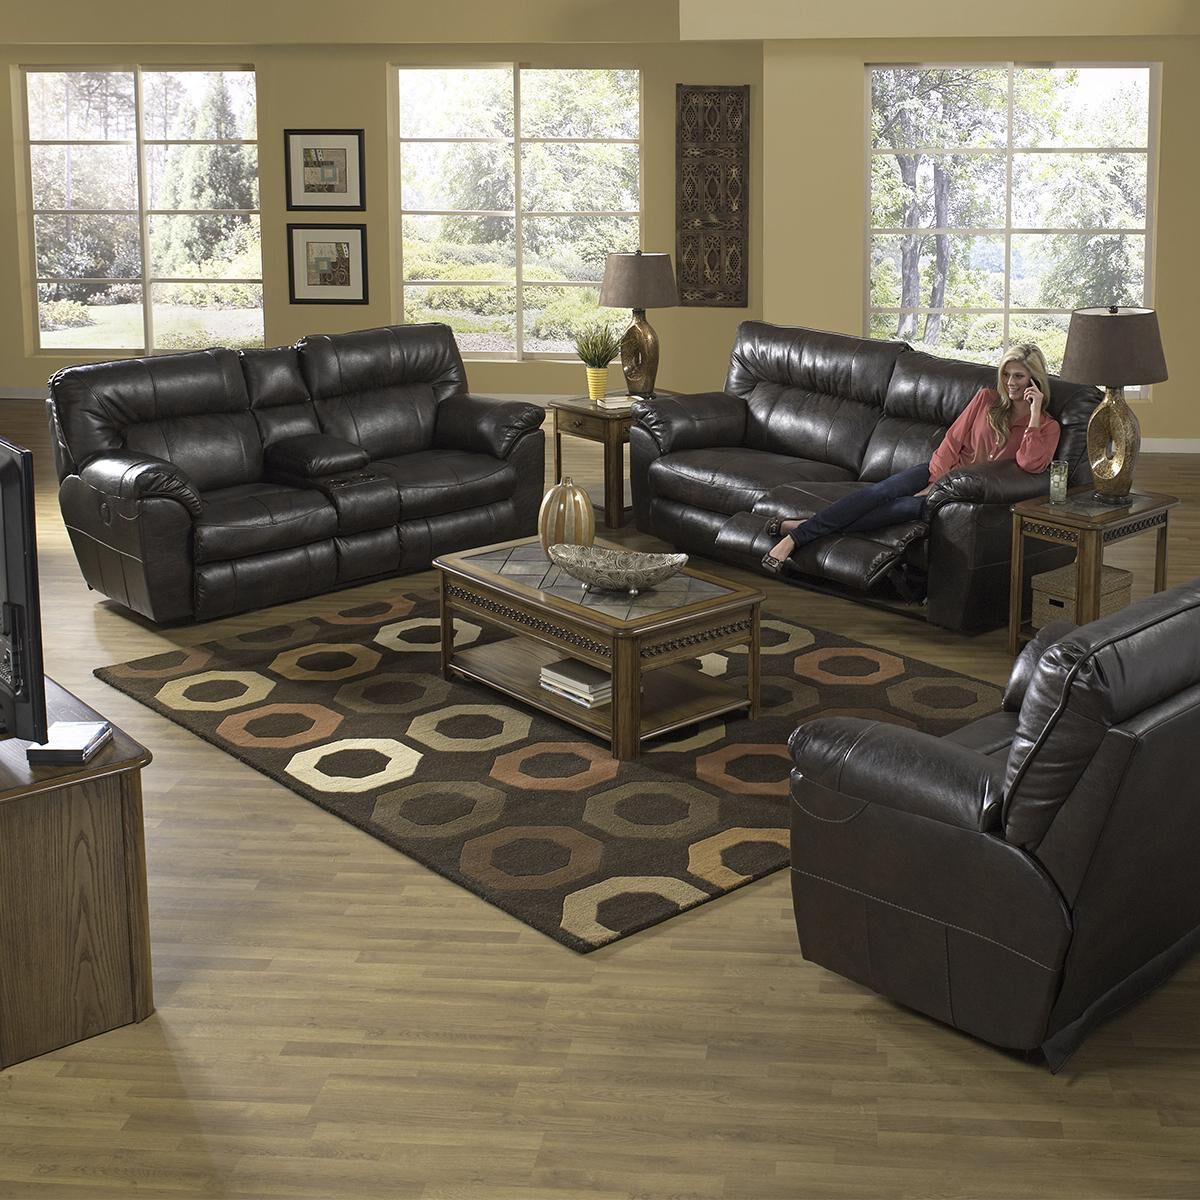 How to make purchase of the small
  reclining loveseat online